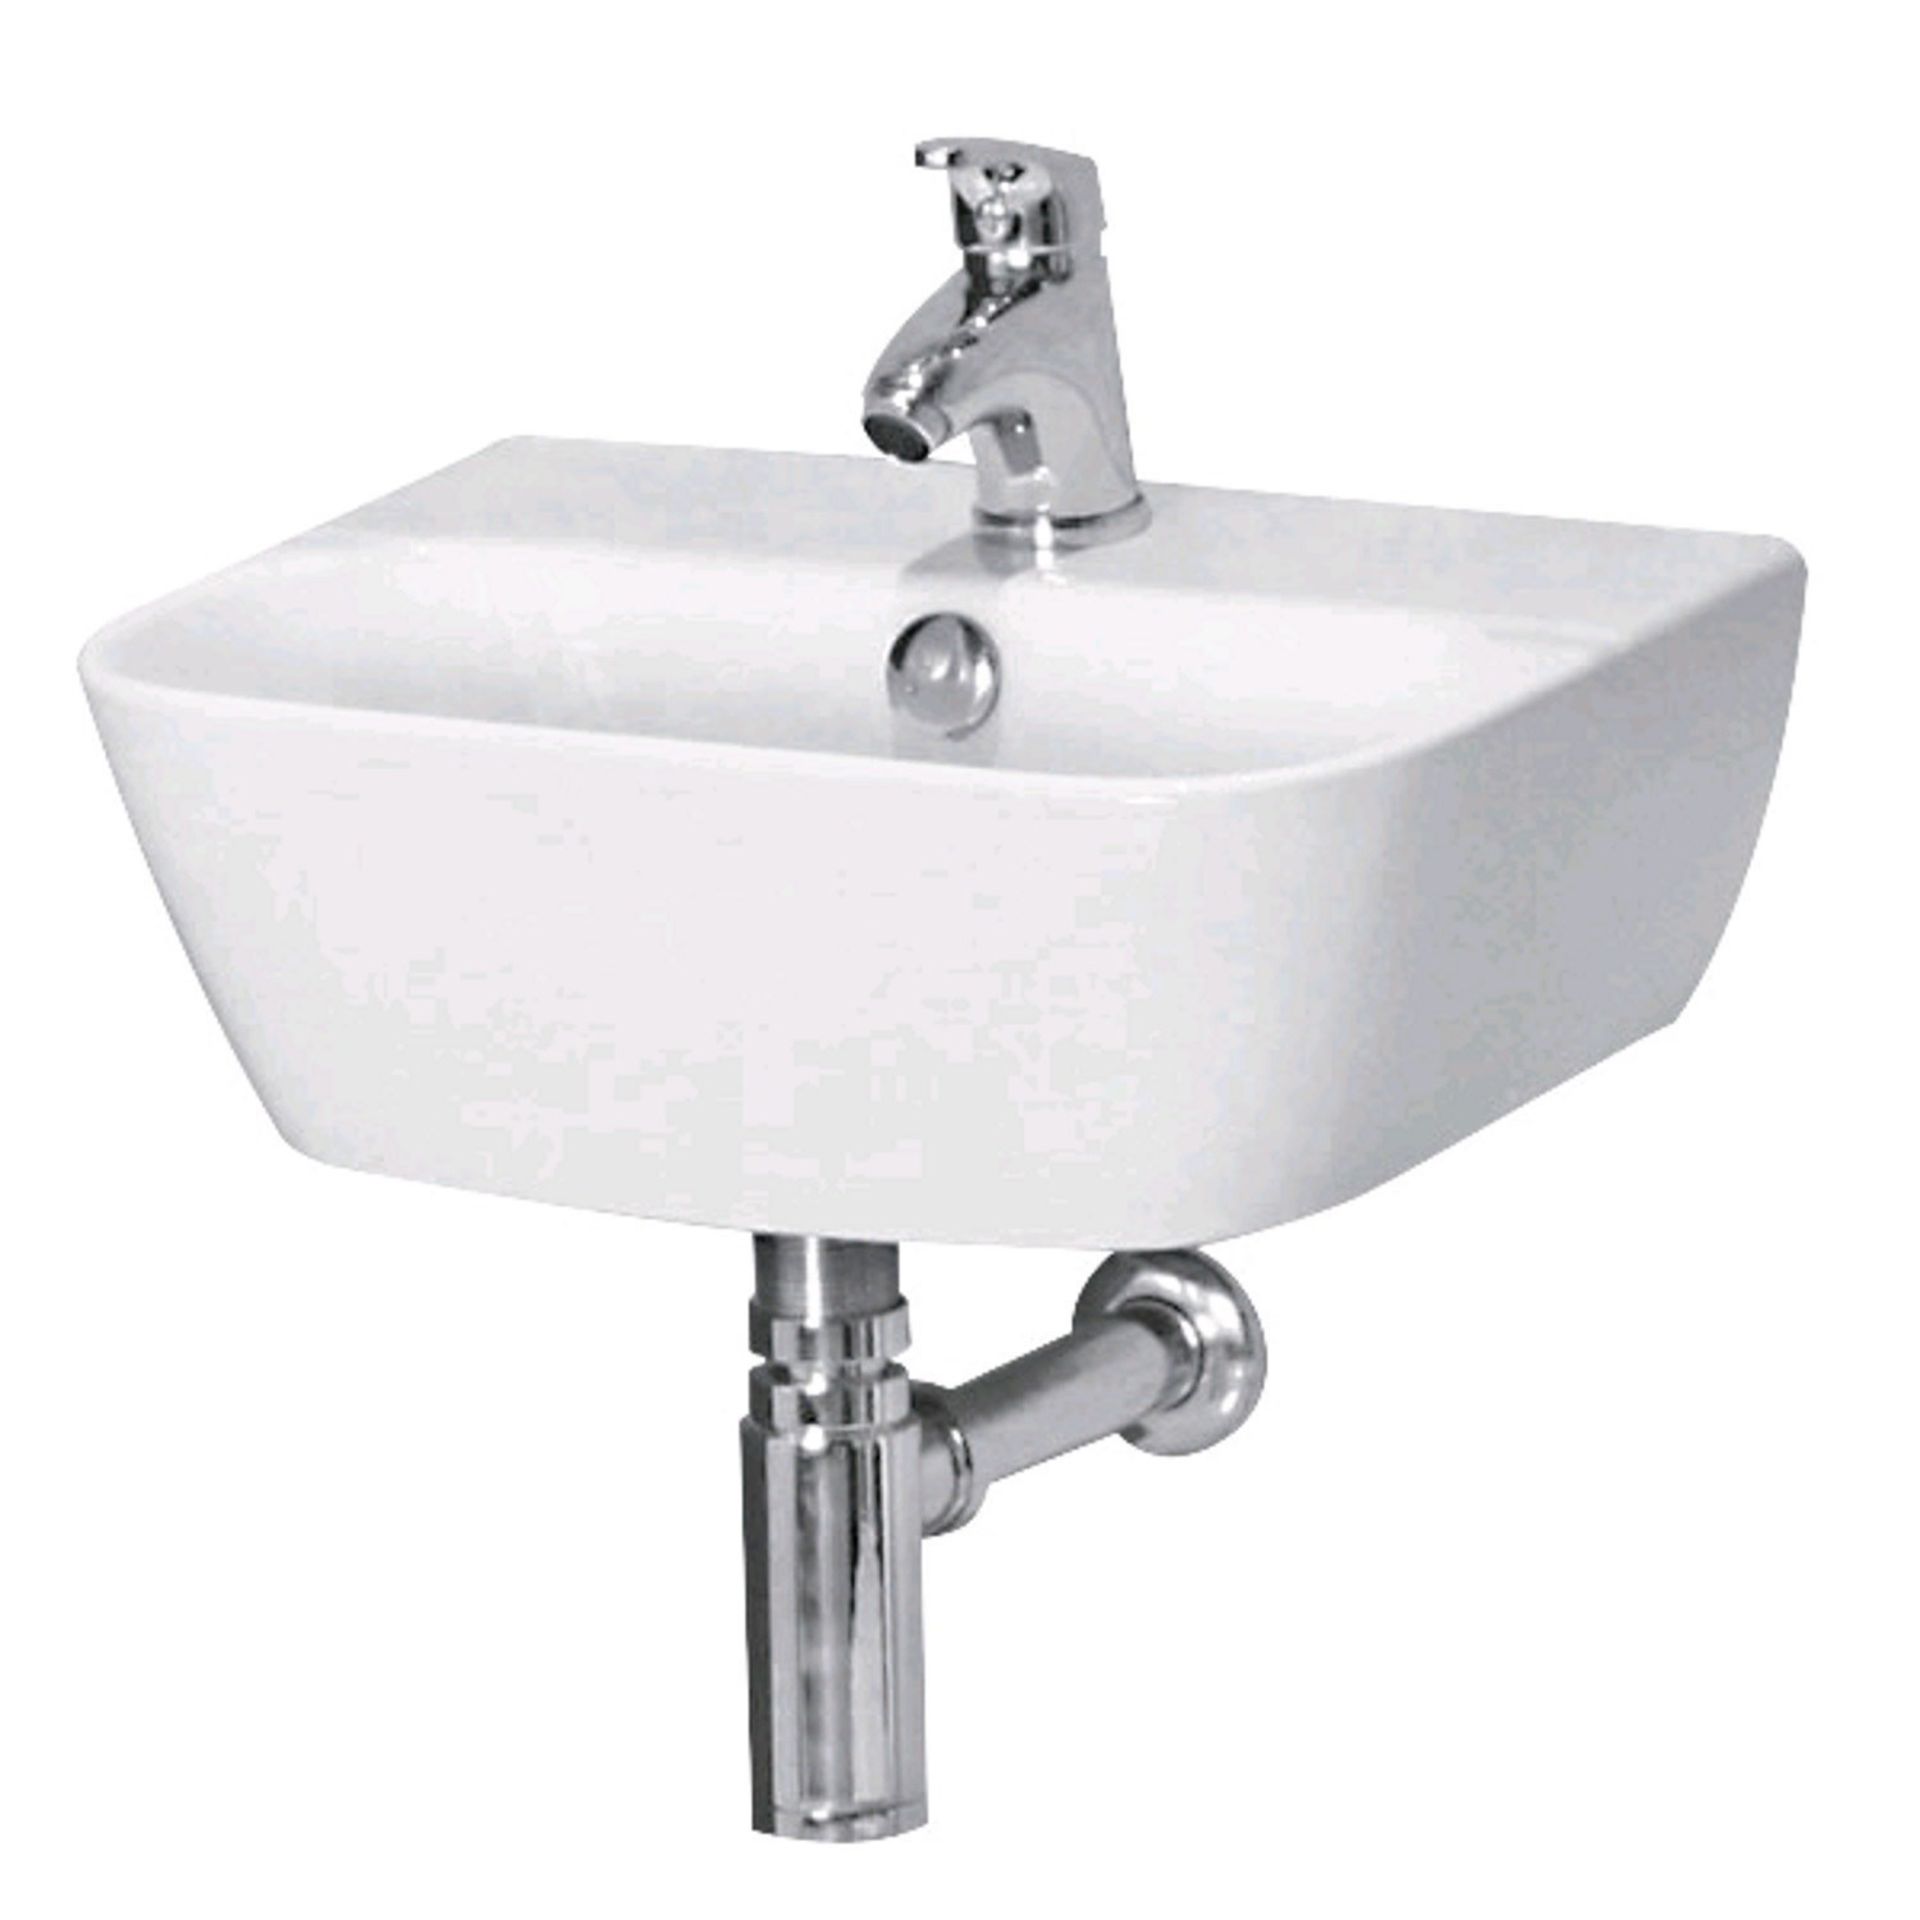 Virtuo Wall Hung Cloakroom Basin. - BI. The Virtuo 1 tap hole wall hung basin. This basin is a - Image 2 of 2